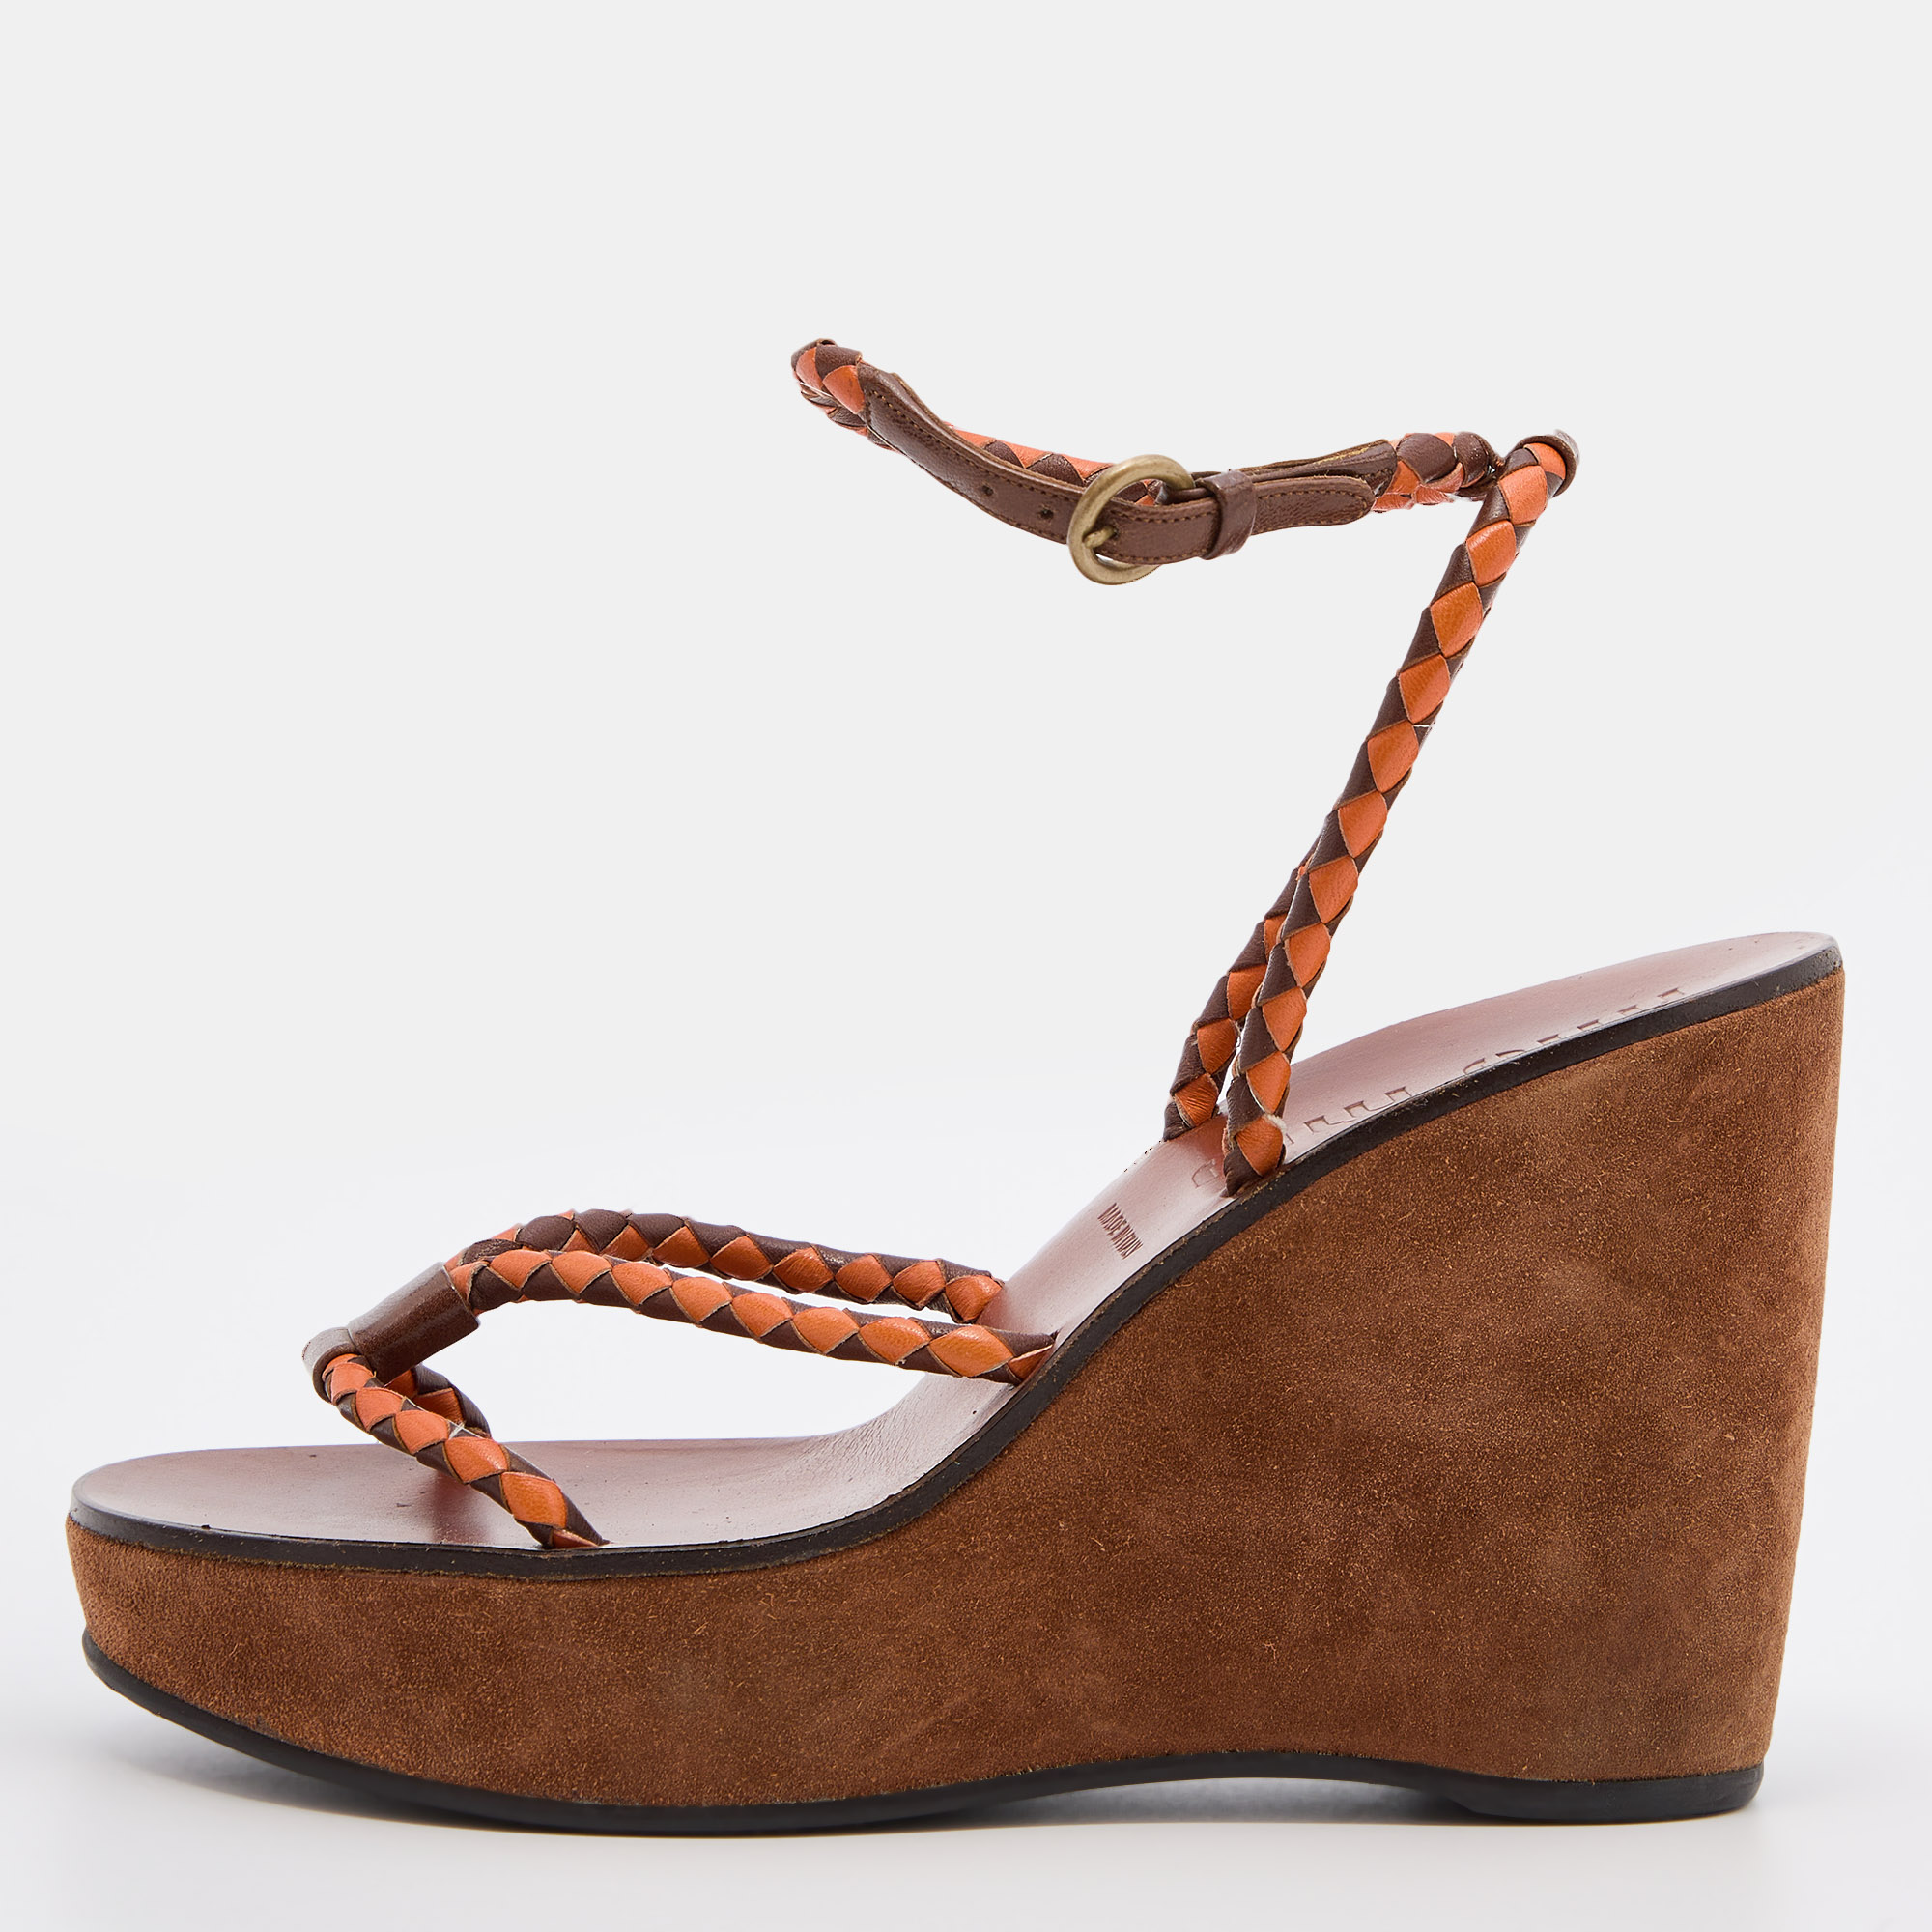 Pre-owned Miu Miu Brown/orange Leather Strappy Wedge Sandals Size 38